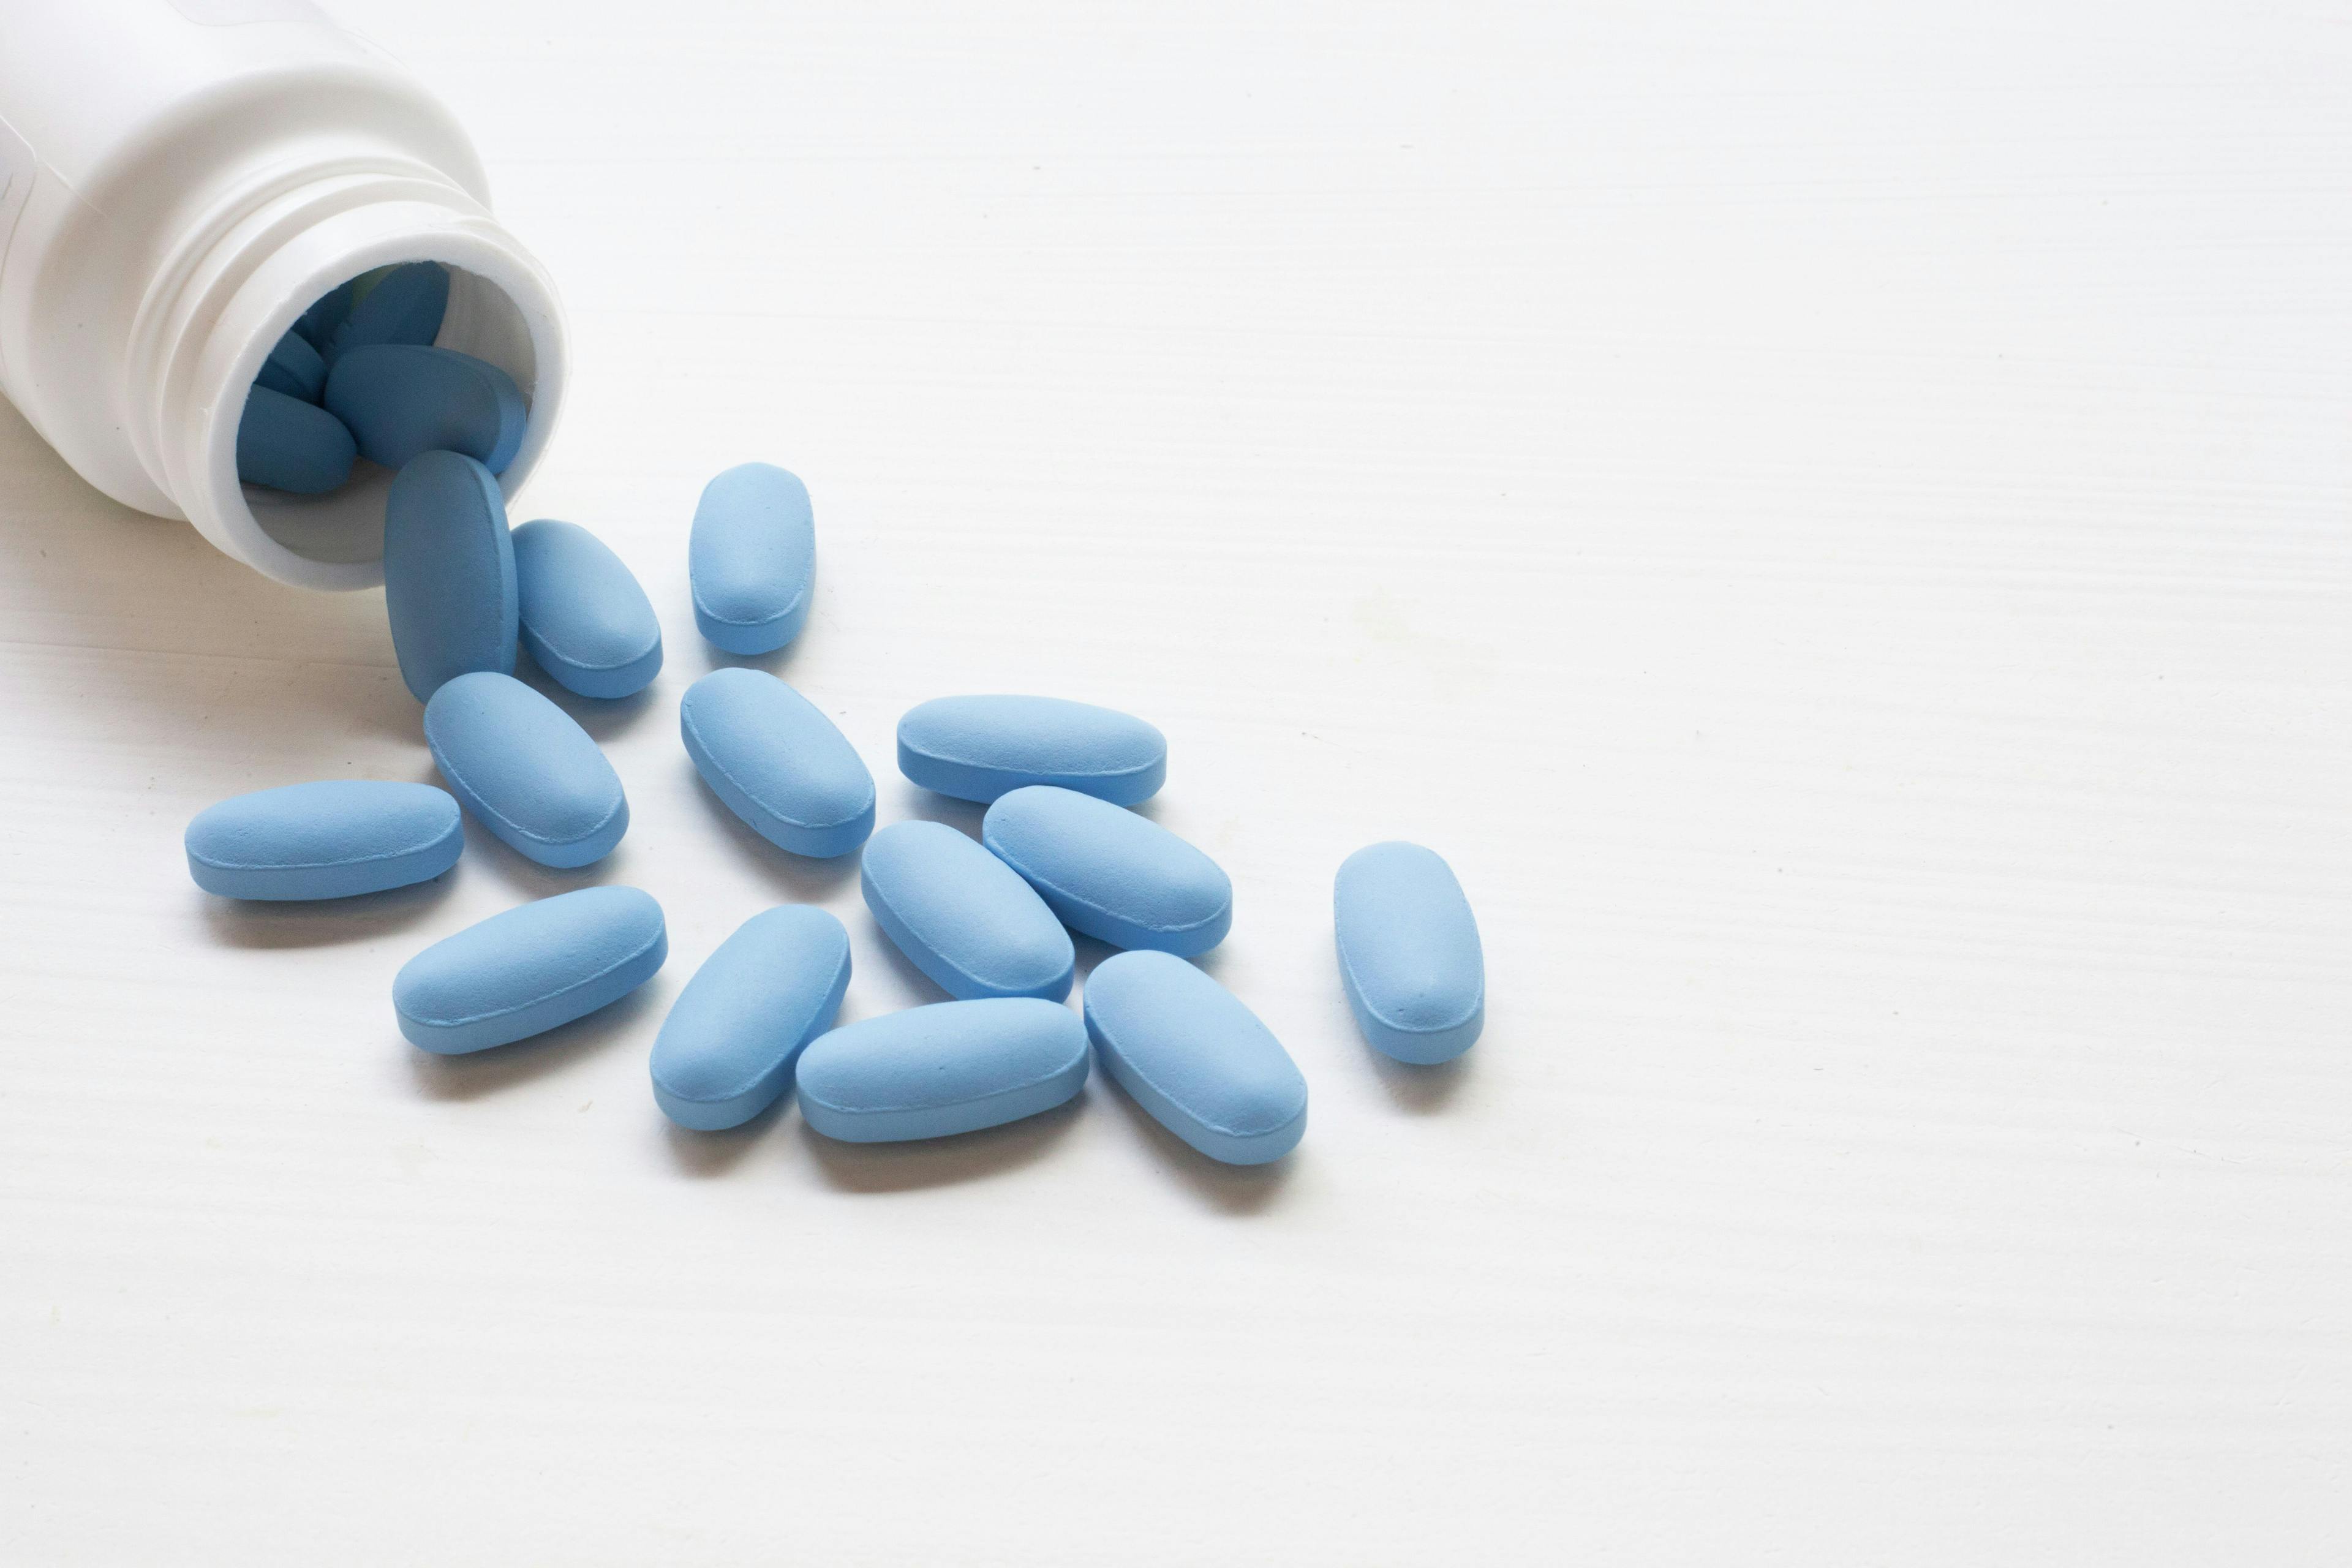 The Biden administration has proposed a new policy that would call for Medicare to cover the cost of preexposure prophylaxis drugs, which have been shown to lower the risk of HIV infection. (Image credit: ©Bowonpat - stock.adobe.com)